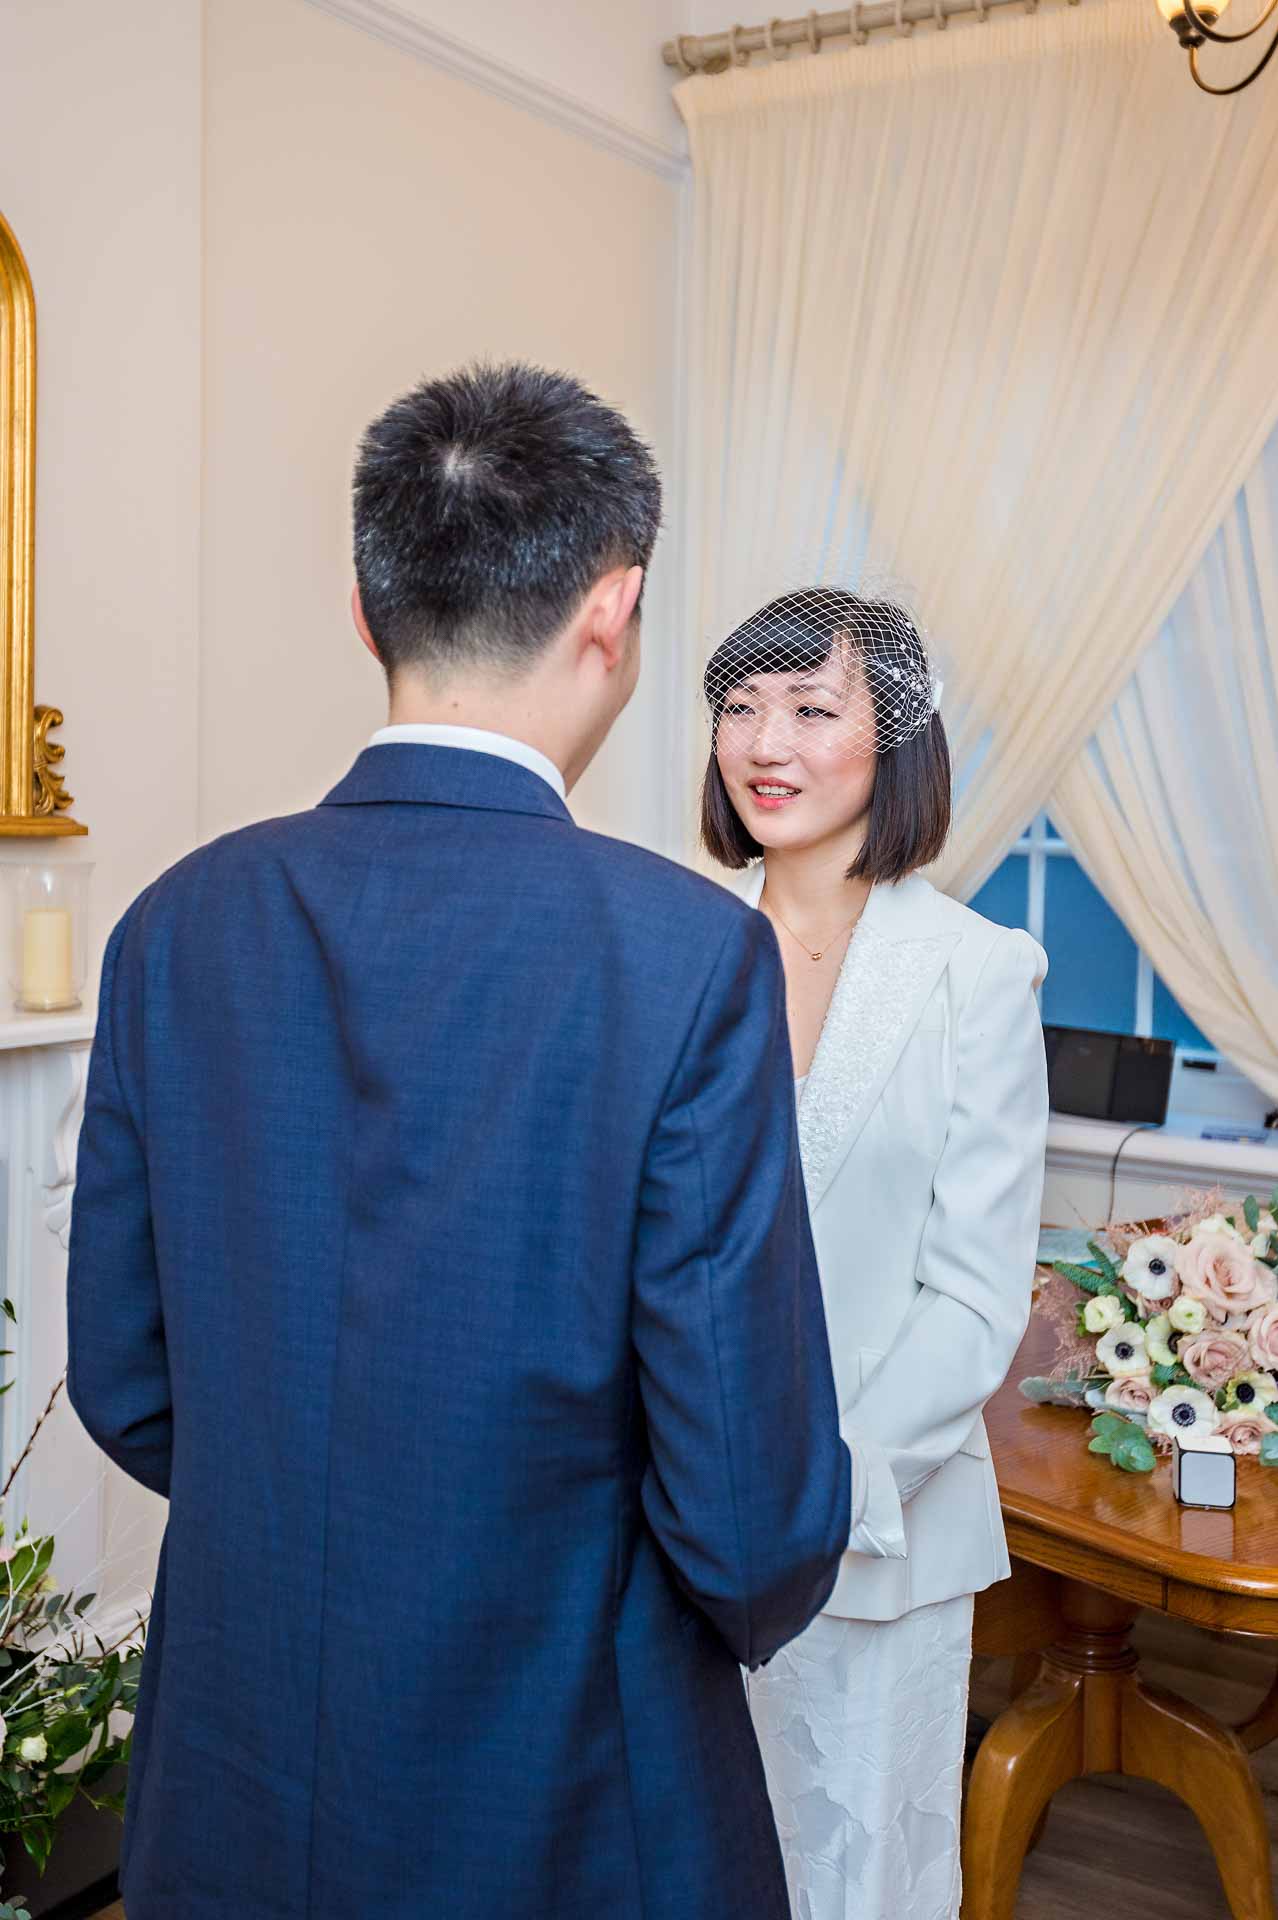 Chinese bride looking at groom during wedding ceremony